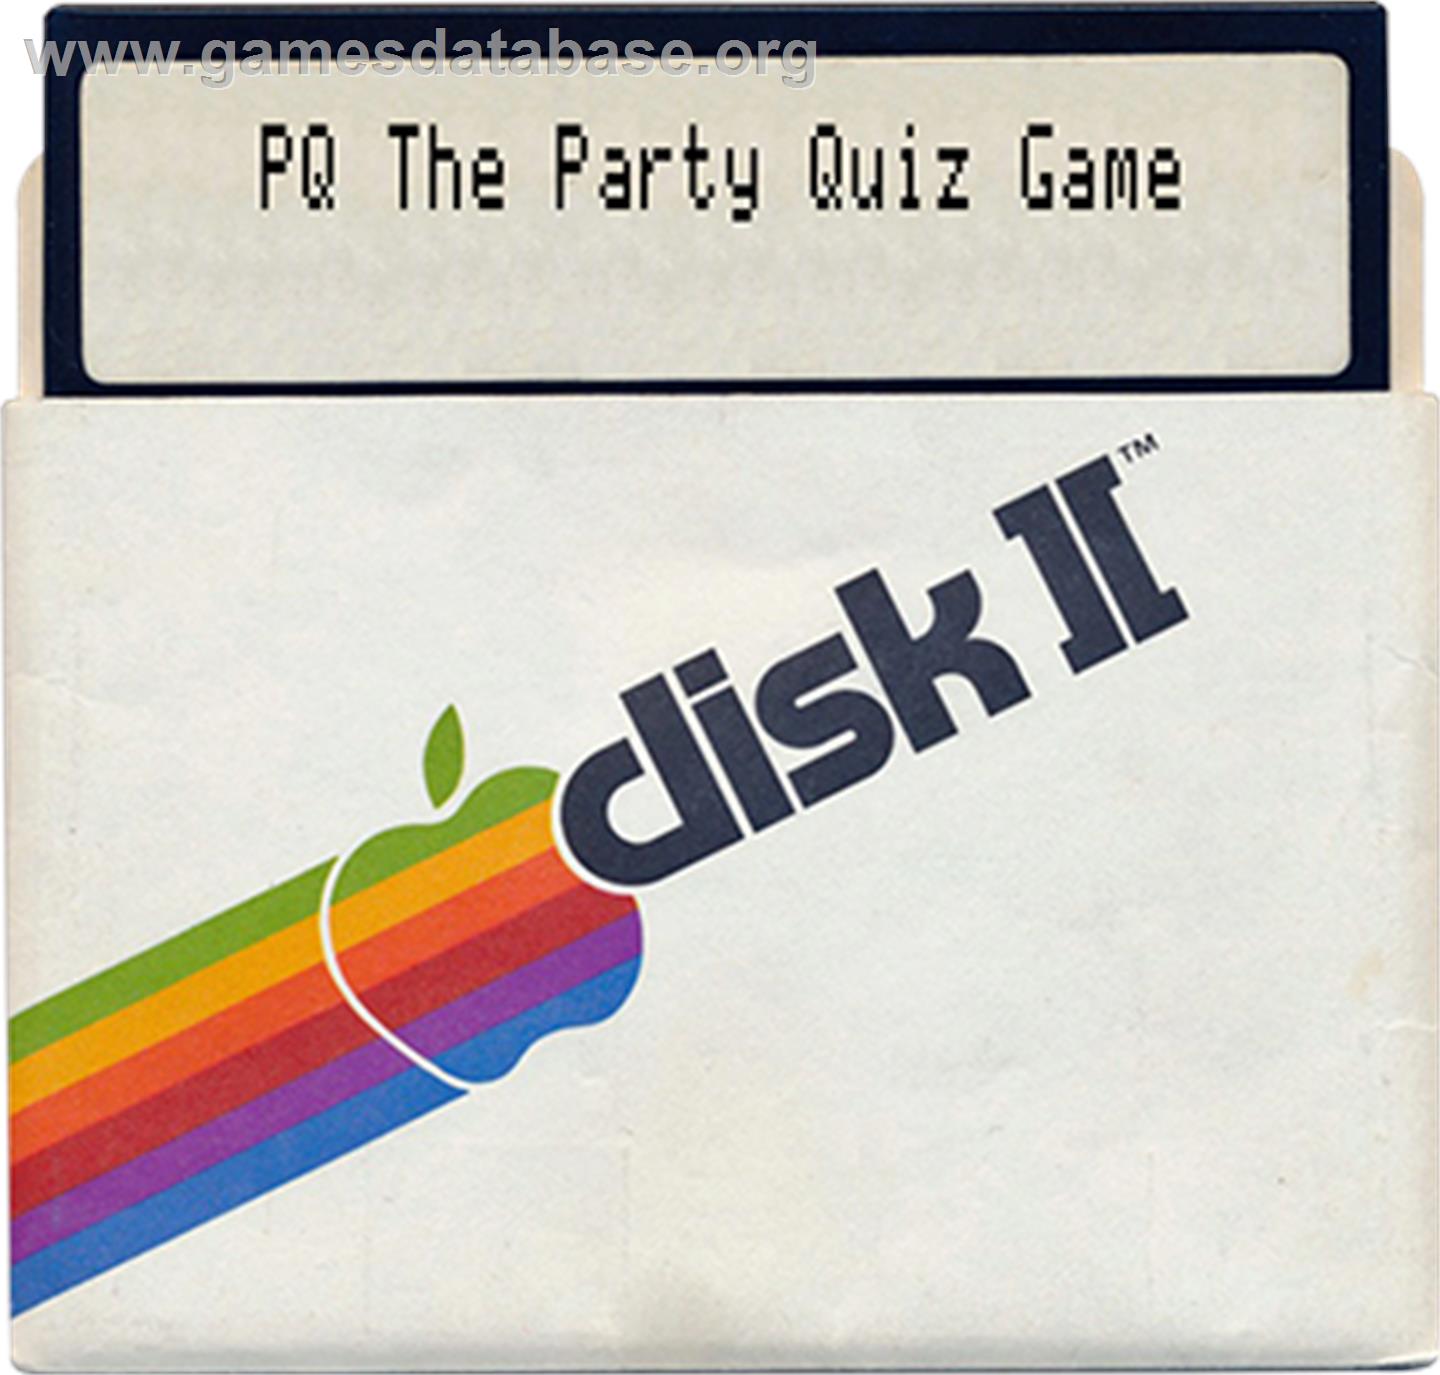 PQ: The Party Quiz Game - Apple II - Artwork - Disc